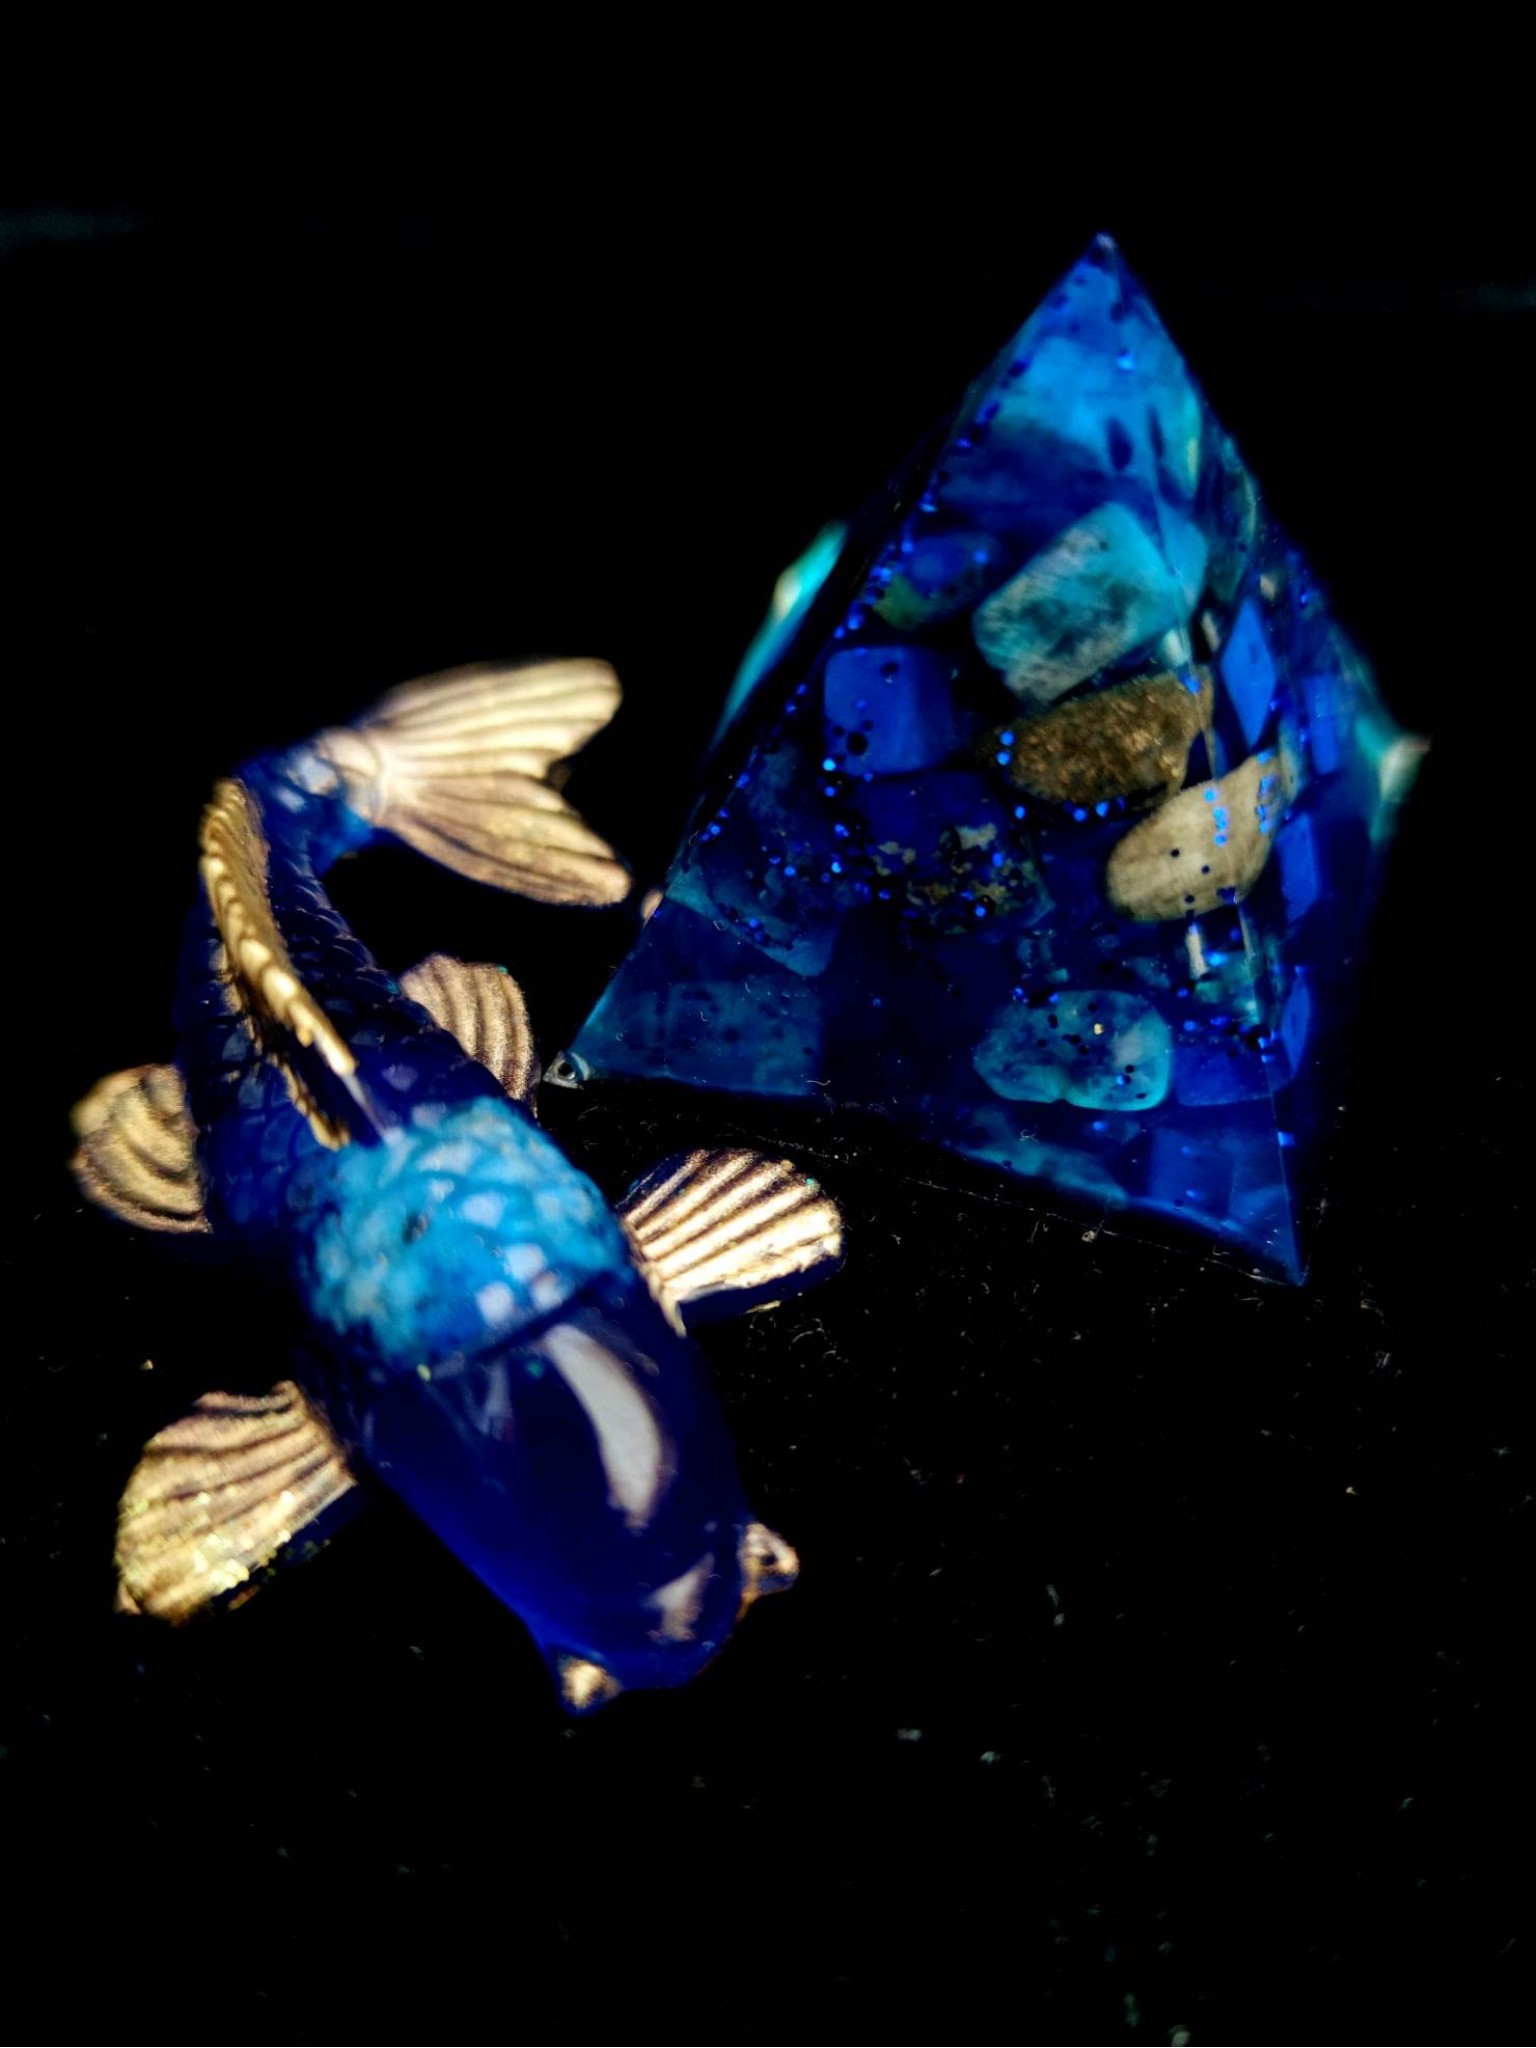 Orgonite gift set for a new home for attracting harmony and happiness - feng shui Koi fish and orgone pyramid with Lapis lazuli